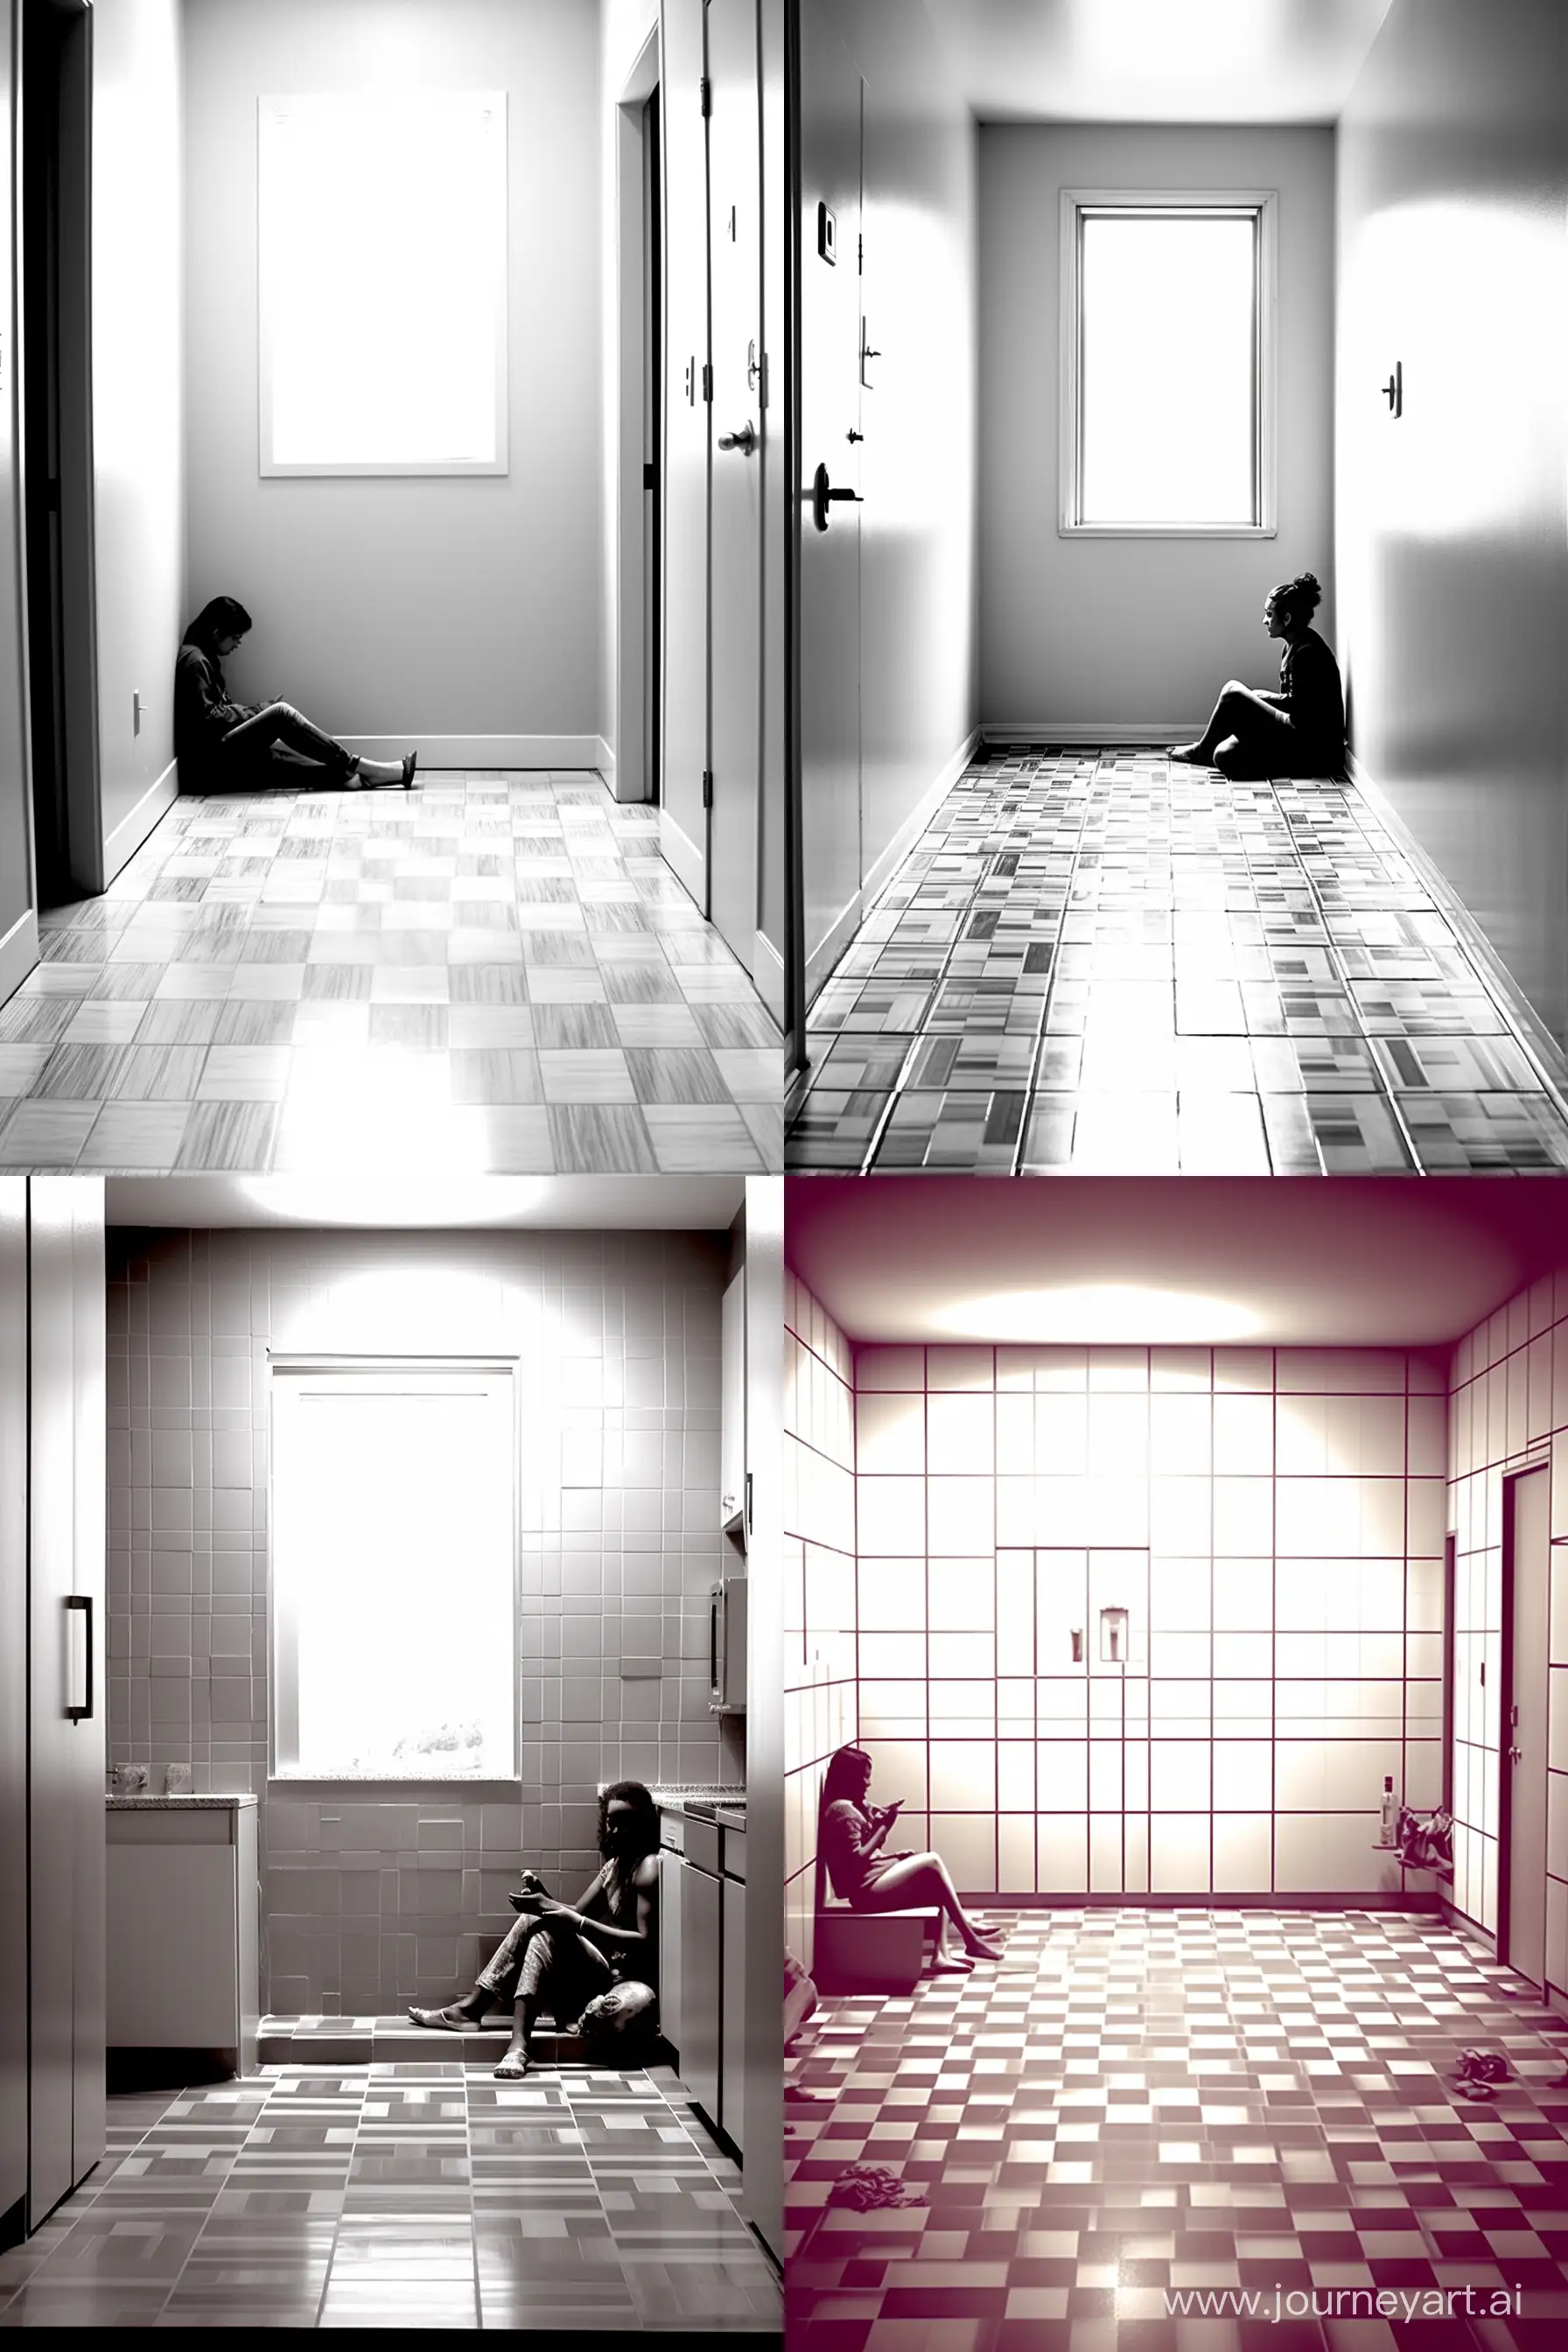 black-and-white photograph depicting a scene with an adult female sitting on the floor of a bathroom. She is unhinged and psychotic. Shes wearing a long sleeve sweater top and sleep shorts. The natural light from a window above the toilet creates soft shadows, emphasizing the textures of the bathroom tiles, floor patterns, and fixtures. The viewer's perspective is from the doorway, looking down at the disturbing scene. The monochromatic photograph uses tonal contrasts, focusing on the young woman's deranged activity in a mundane environment. --ar 2:3